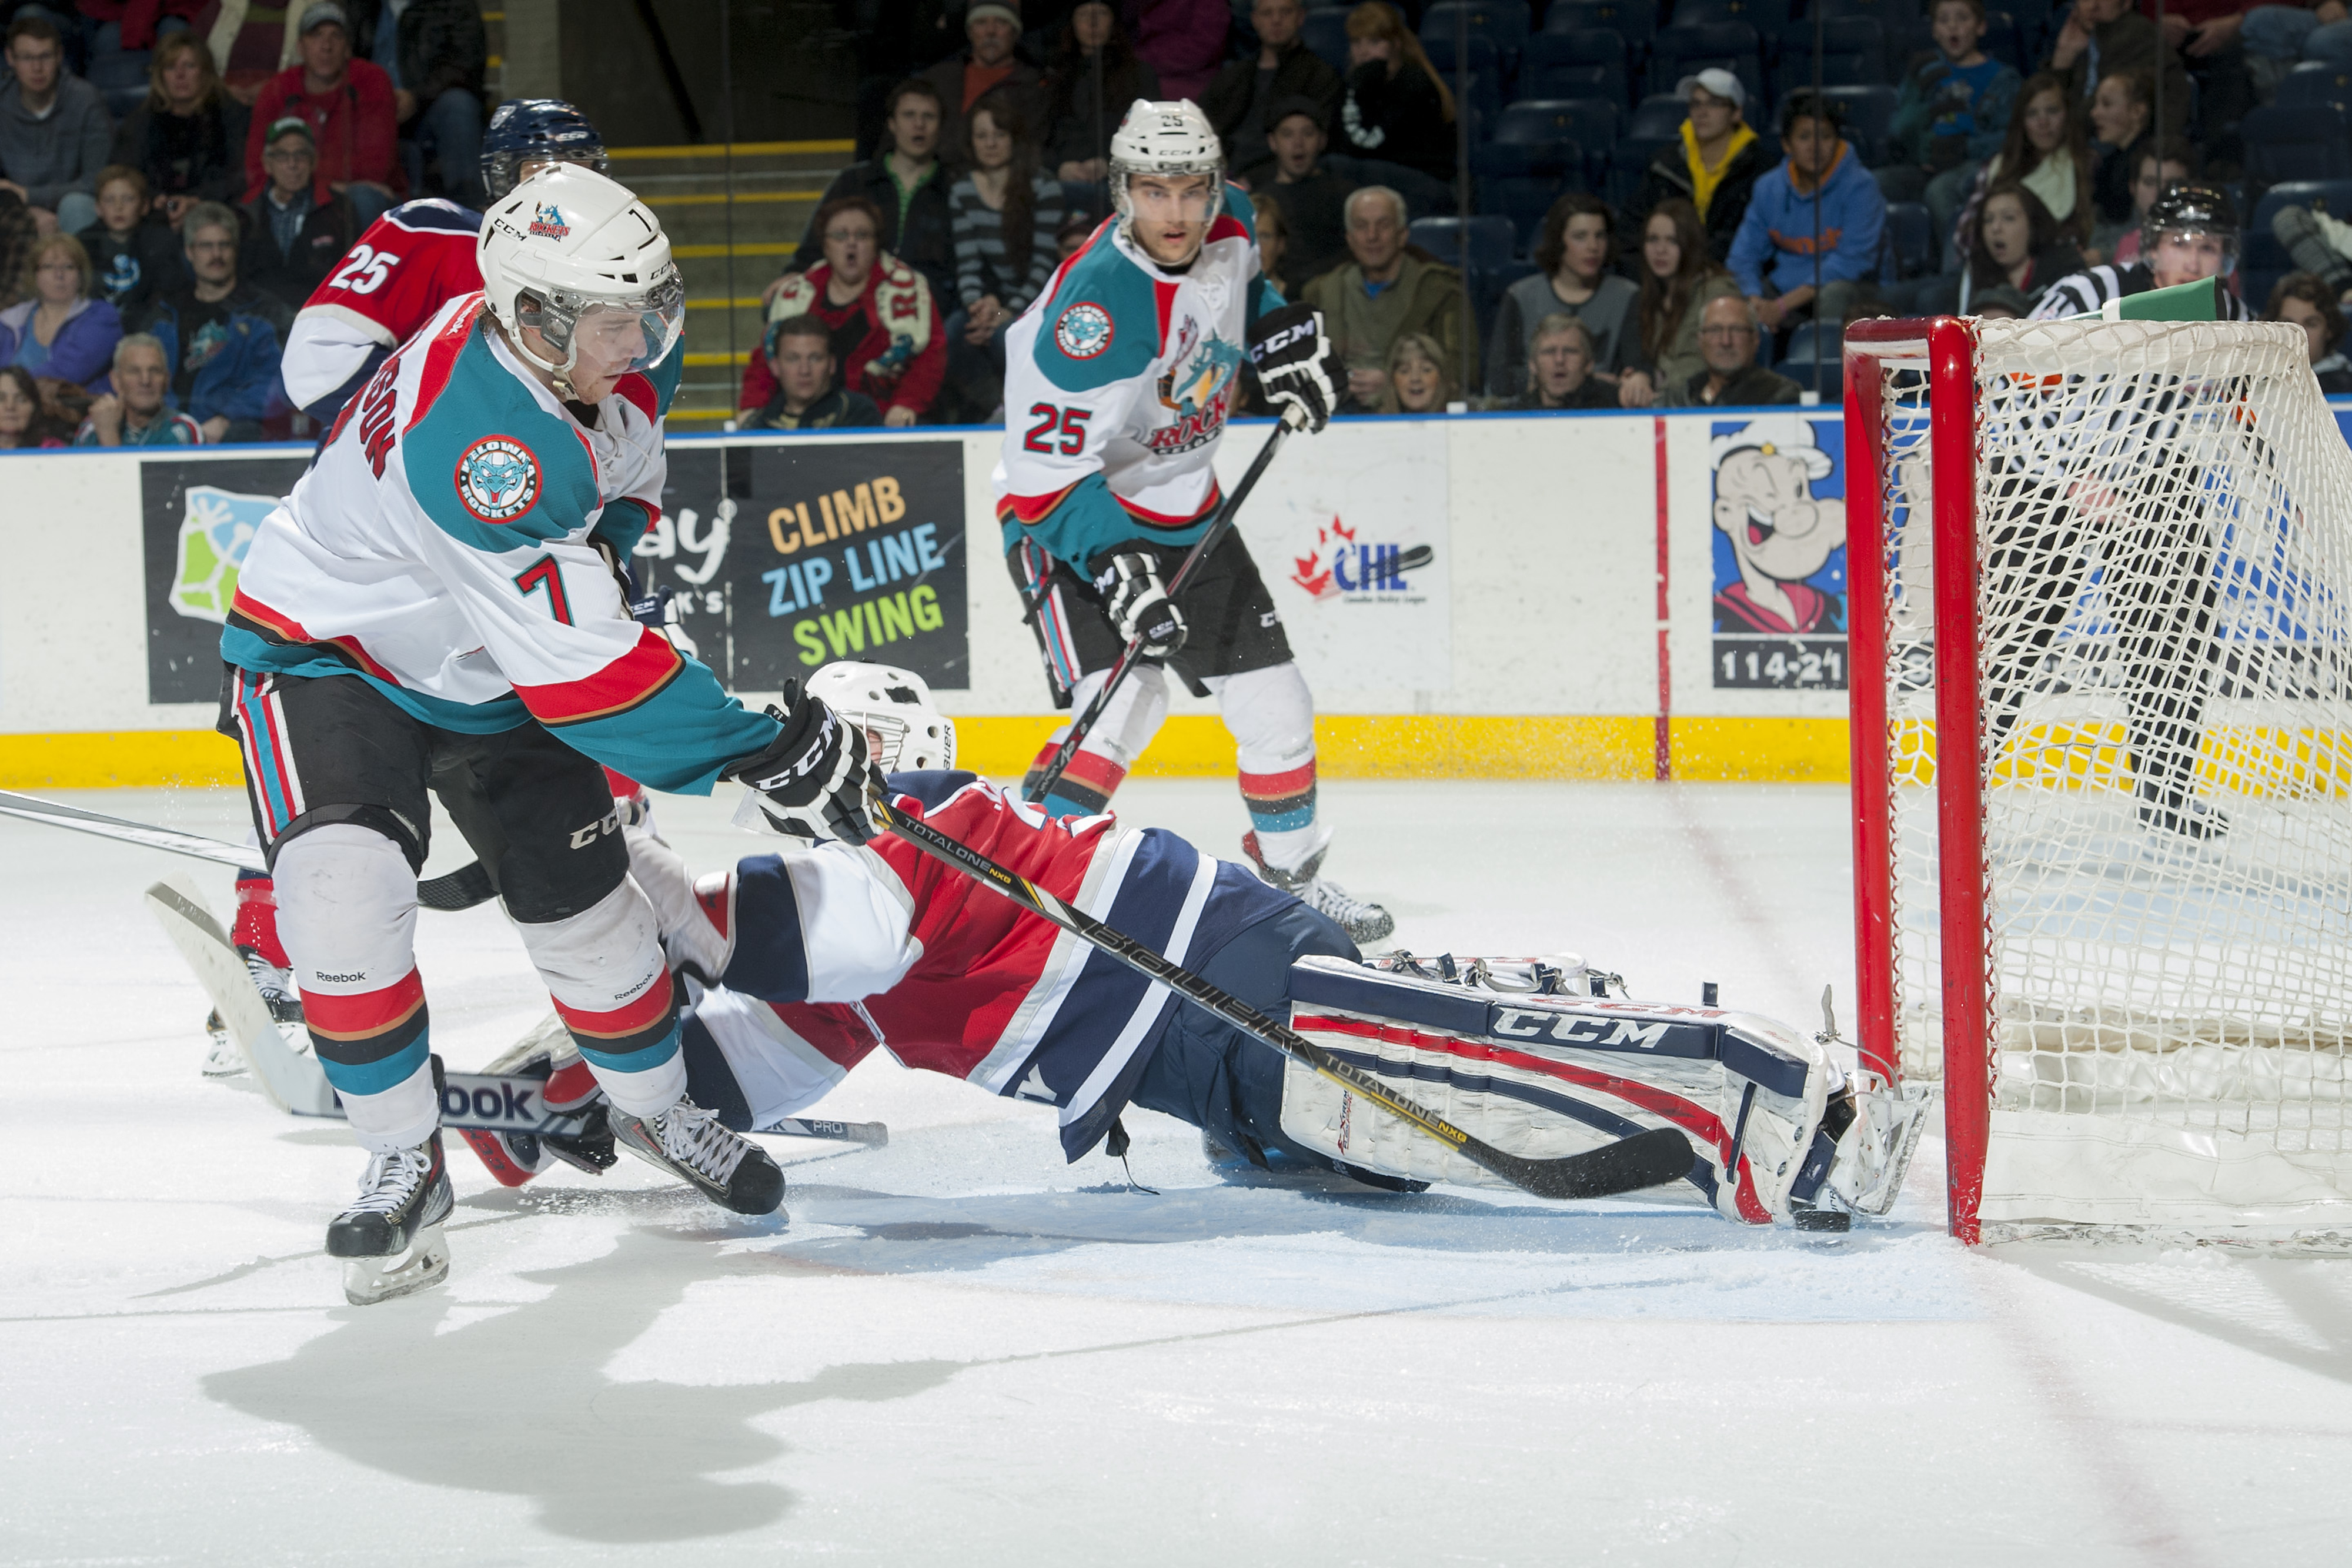 Damon Severson #7 of the Kelowna Rockets scores the seventh goal on Evan Sarthou #31 of the Tri City Americans during the third period on March 8, 2014 at Prospera Place in Kelowna, British Columbia, Canada.